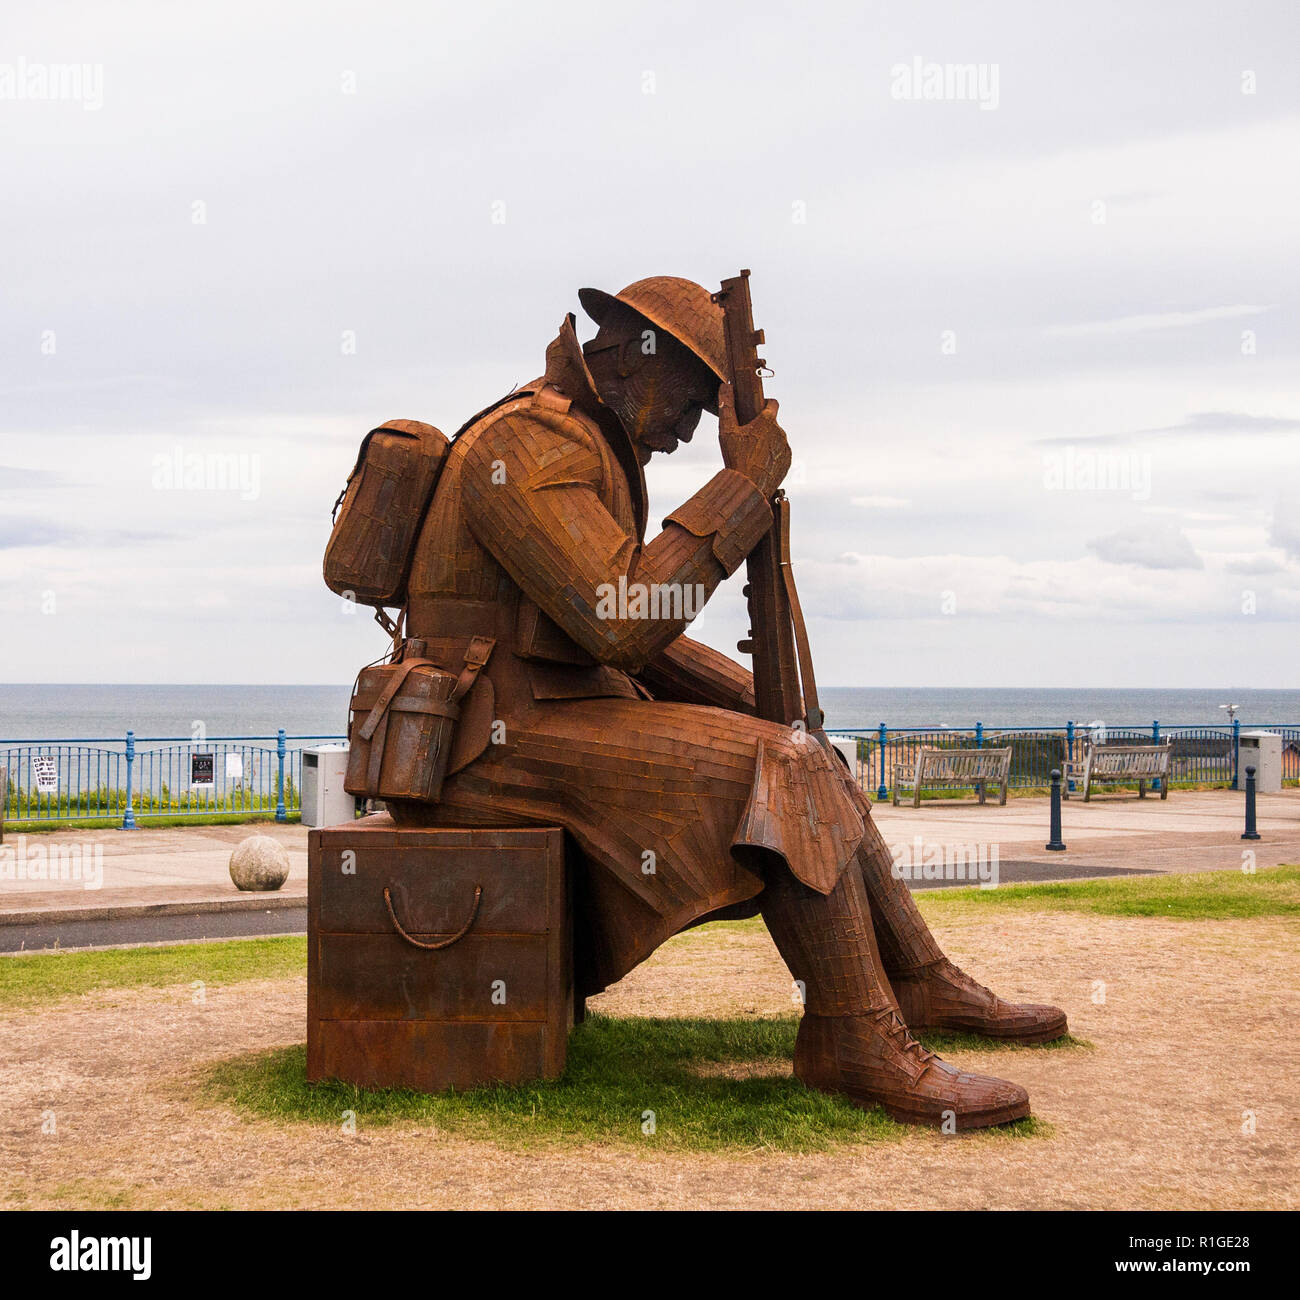 The statue of Tommy, Soldier 1101,on the seafront  at Seaham,England,UK Stock Photo